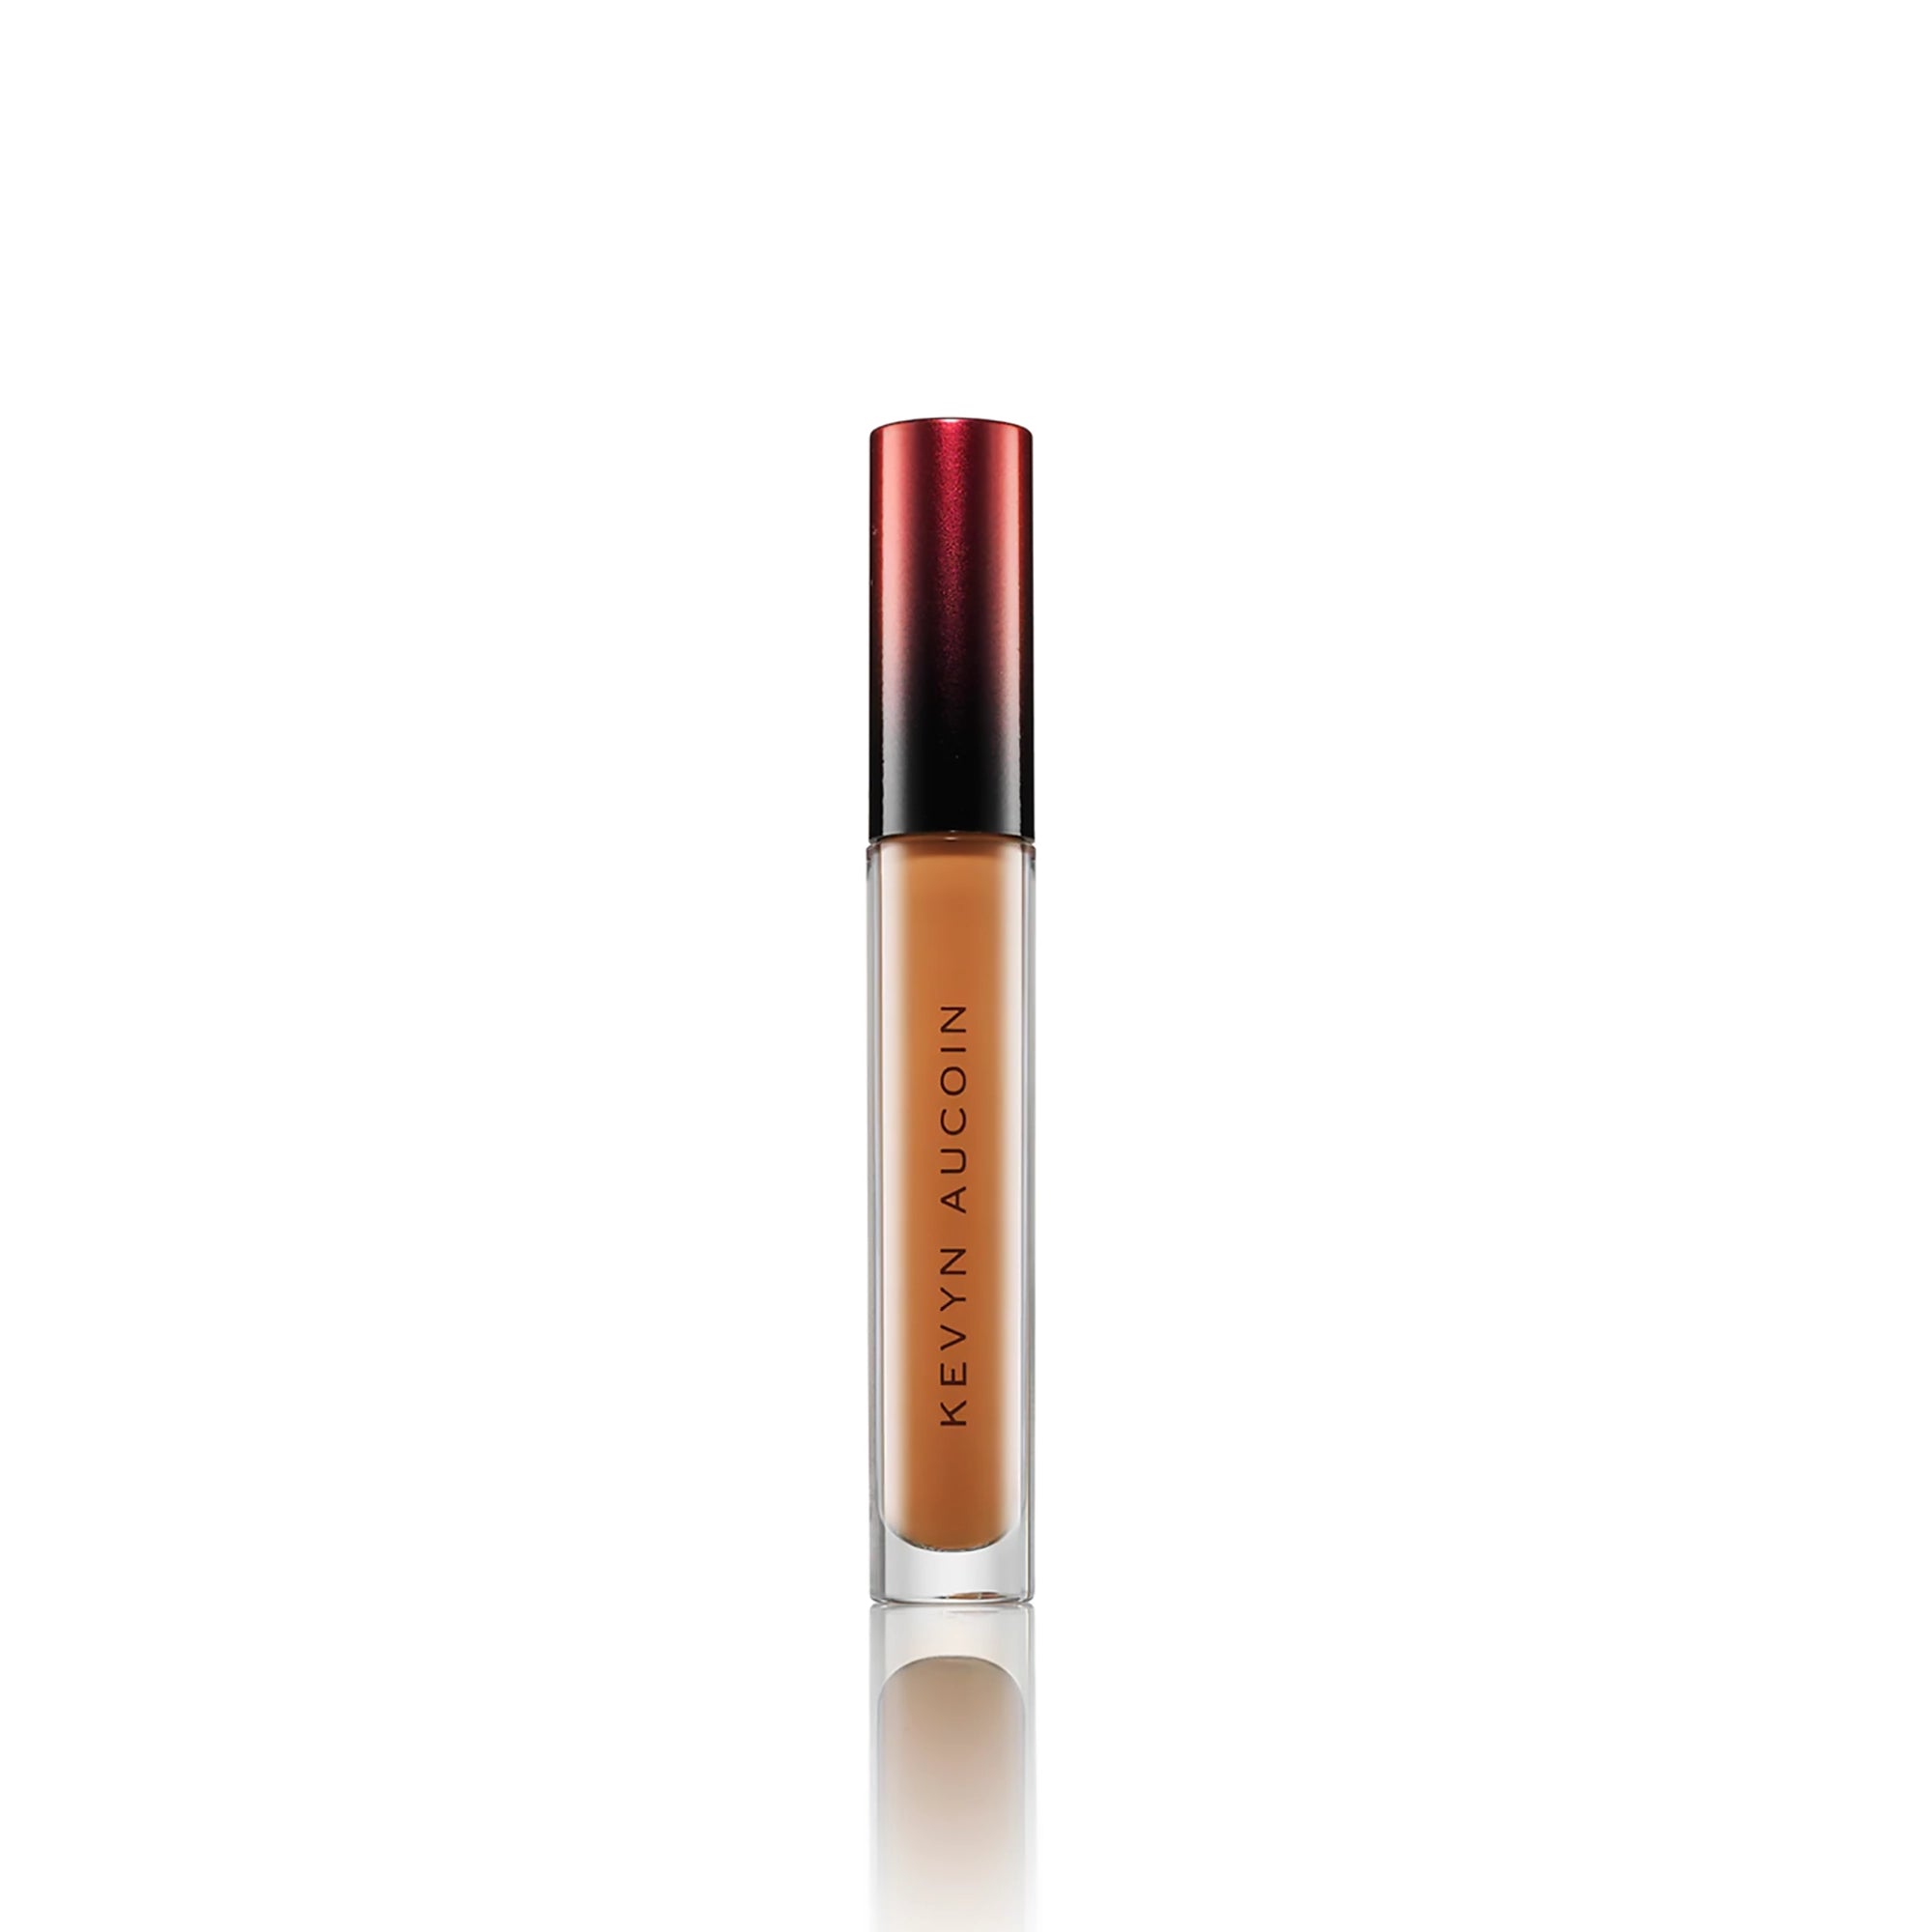 Kevyn Aucoin The Etherealist Super Natural Concealer / DEEP 9